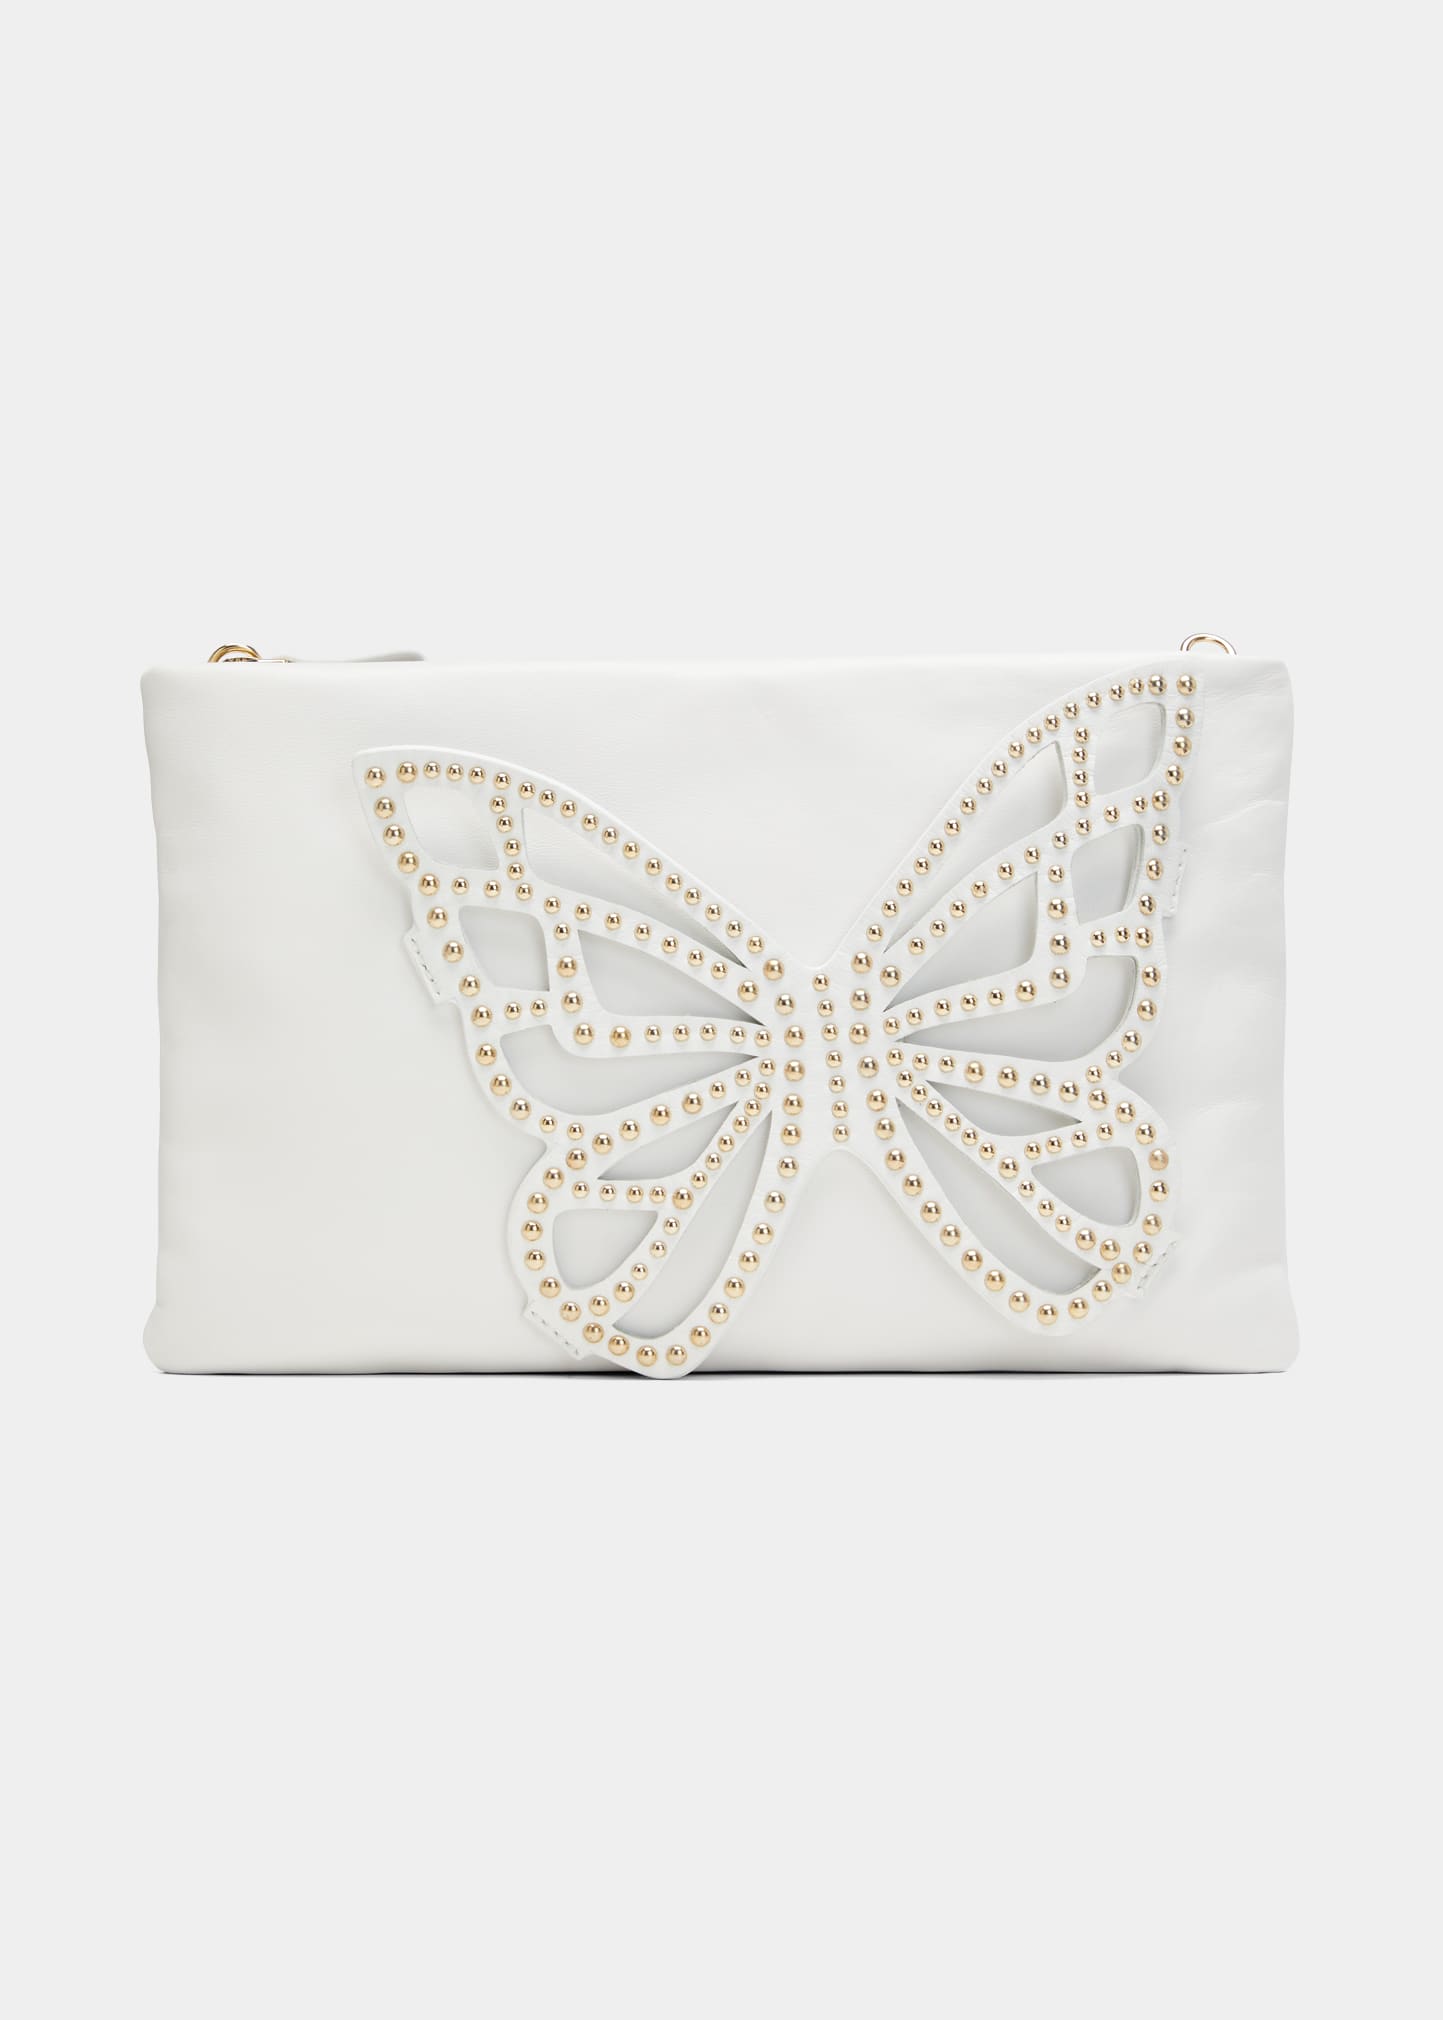 Sophia Webster Flossy Studded Butterfly Clutch Bag In White Gold